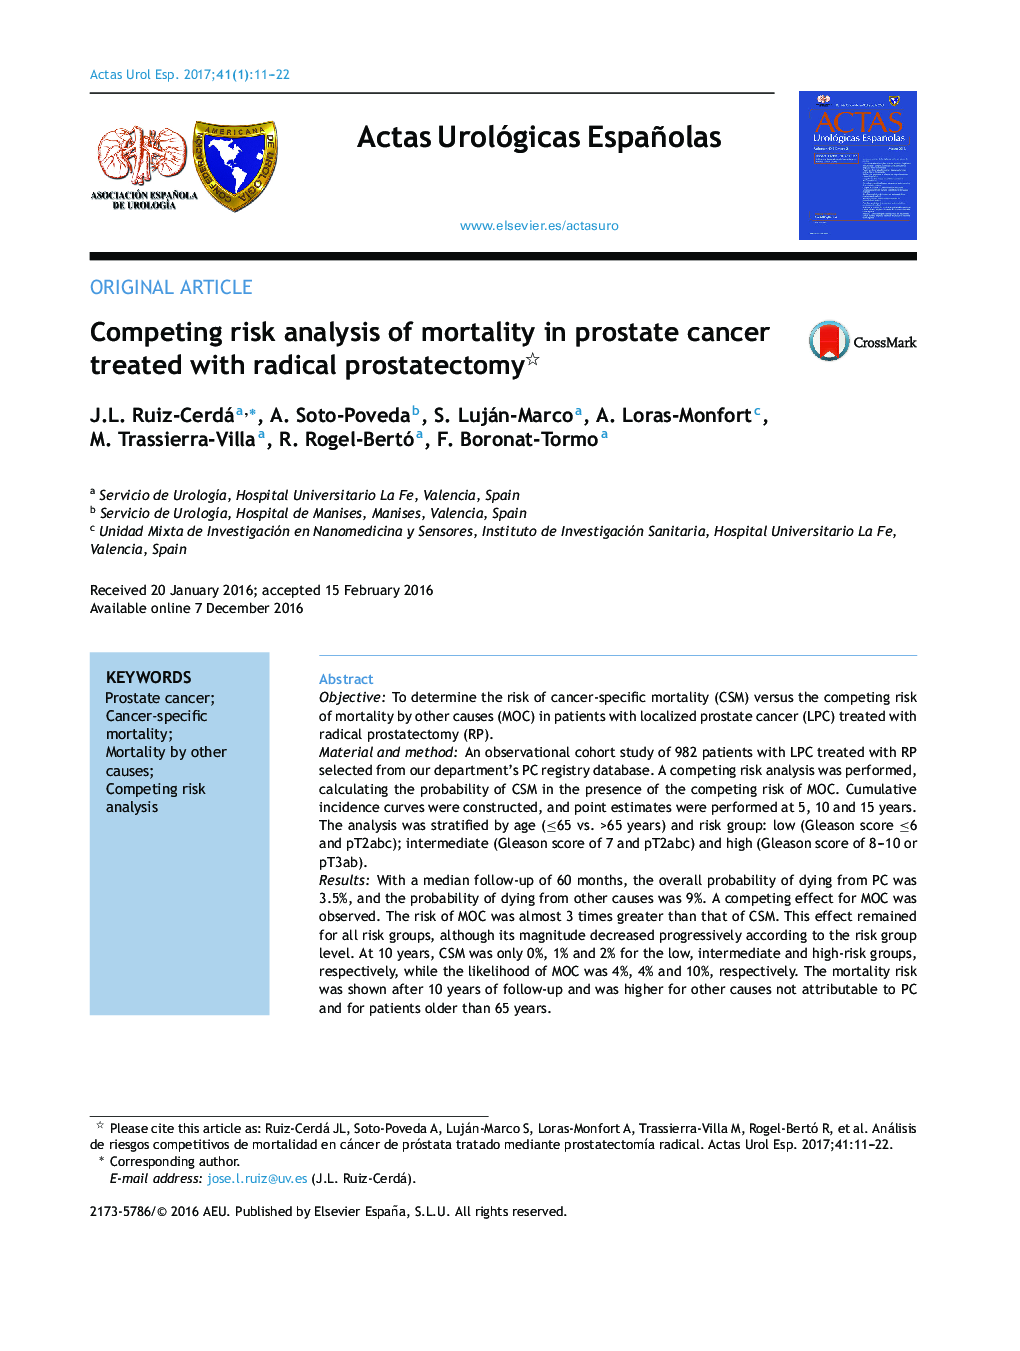 Competing risk analysis of mortality in prostate cancer treated with radical prostatectomy